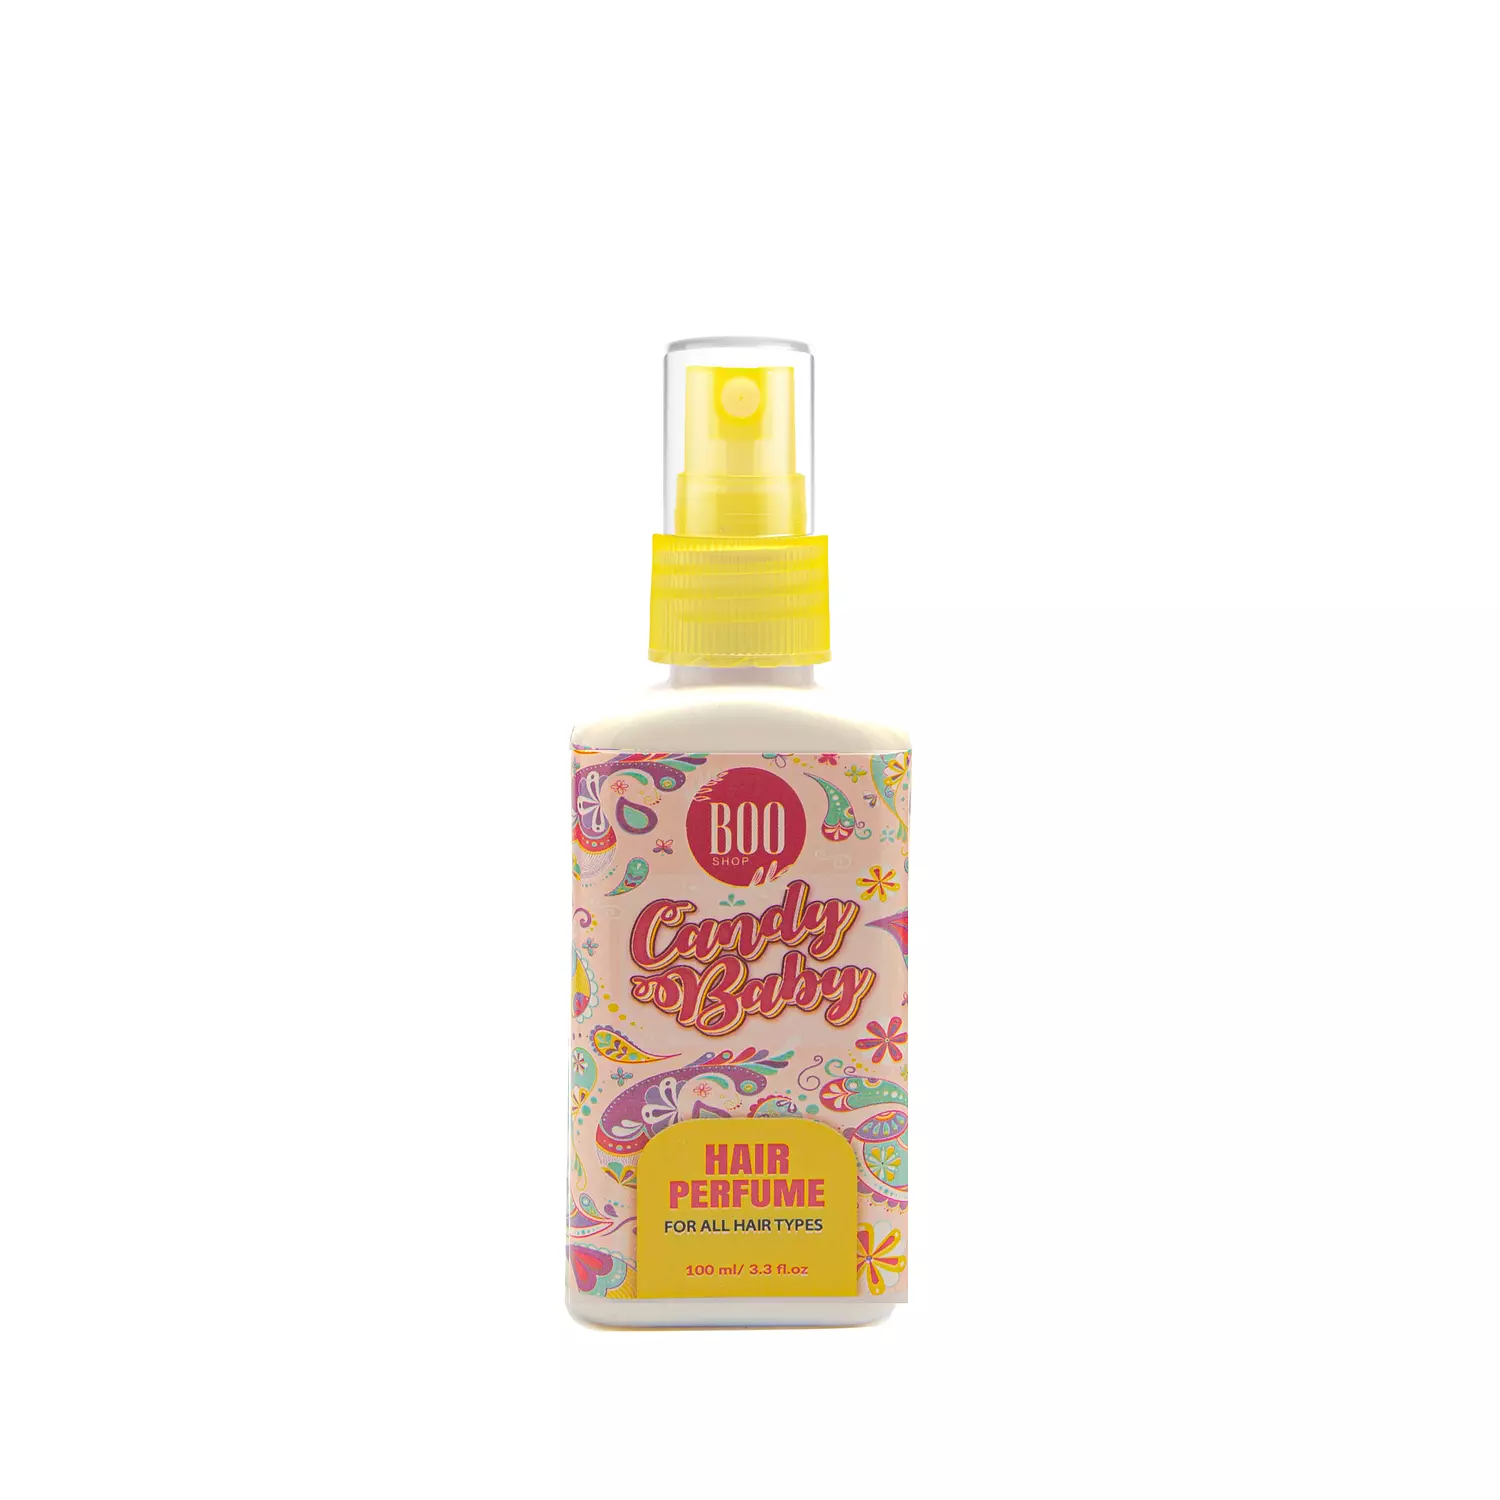 Hair perfume mist - Candy baby 100ml hover image